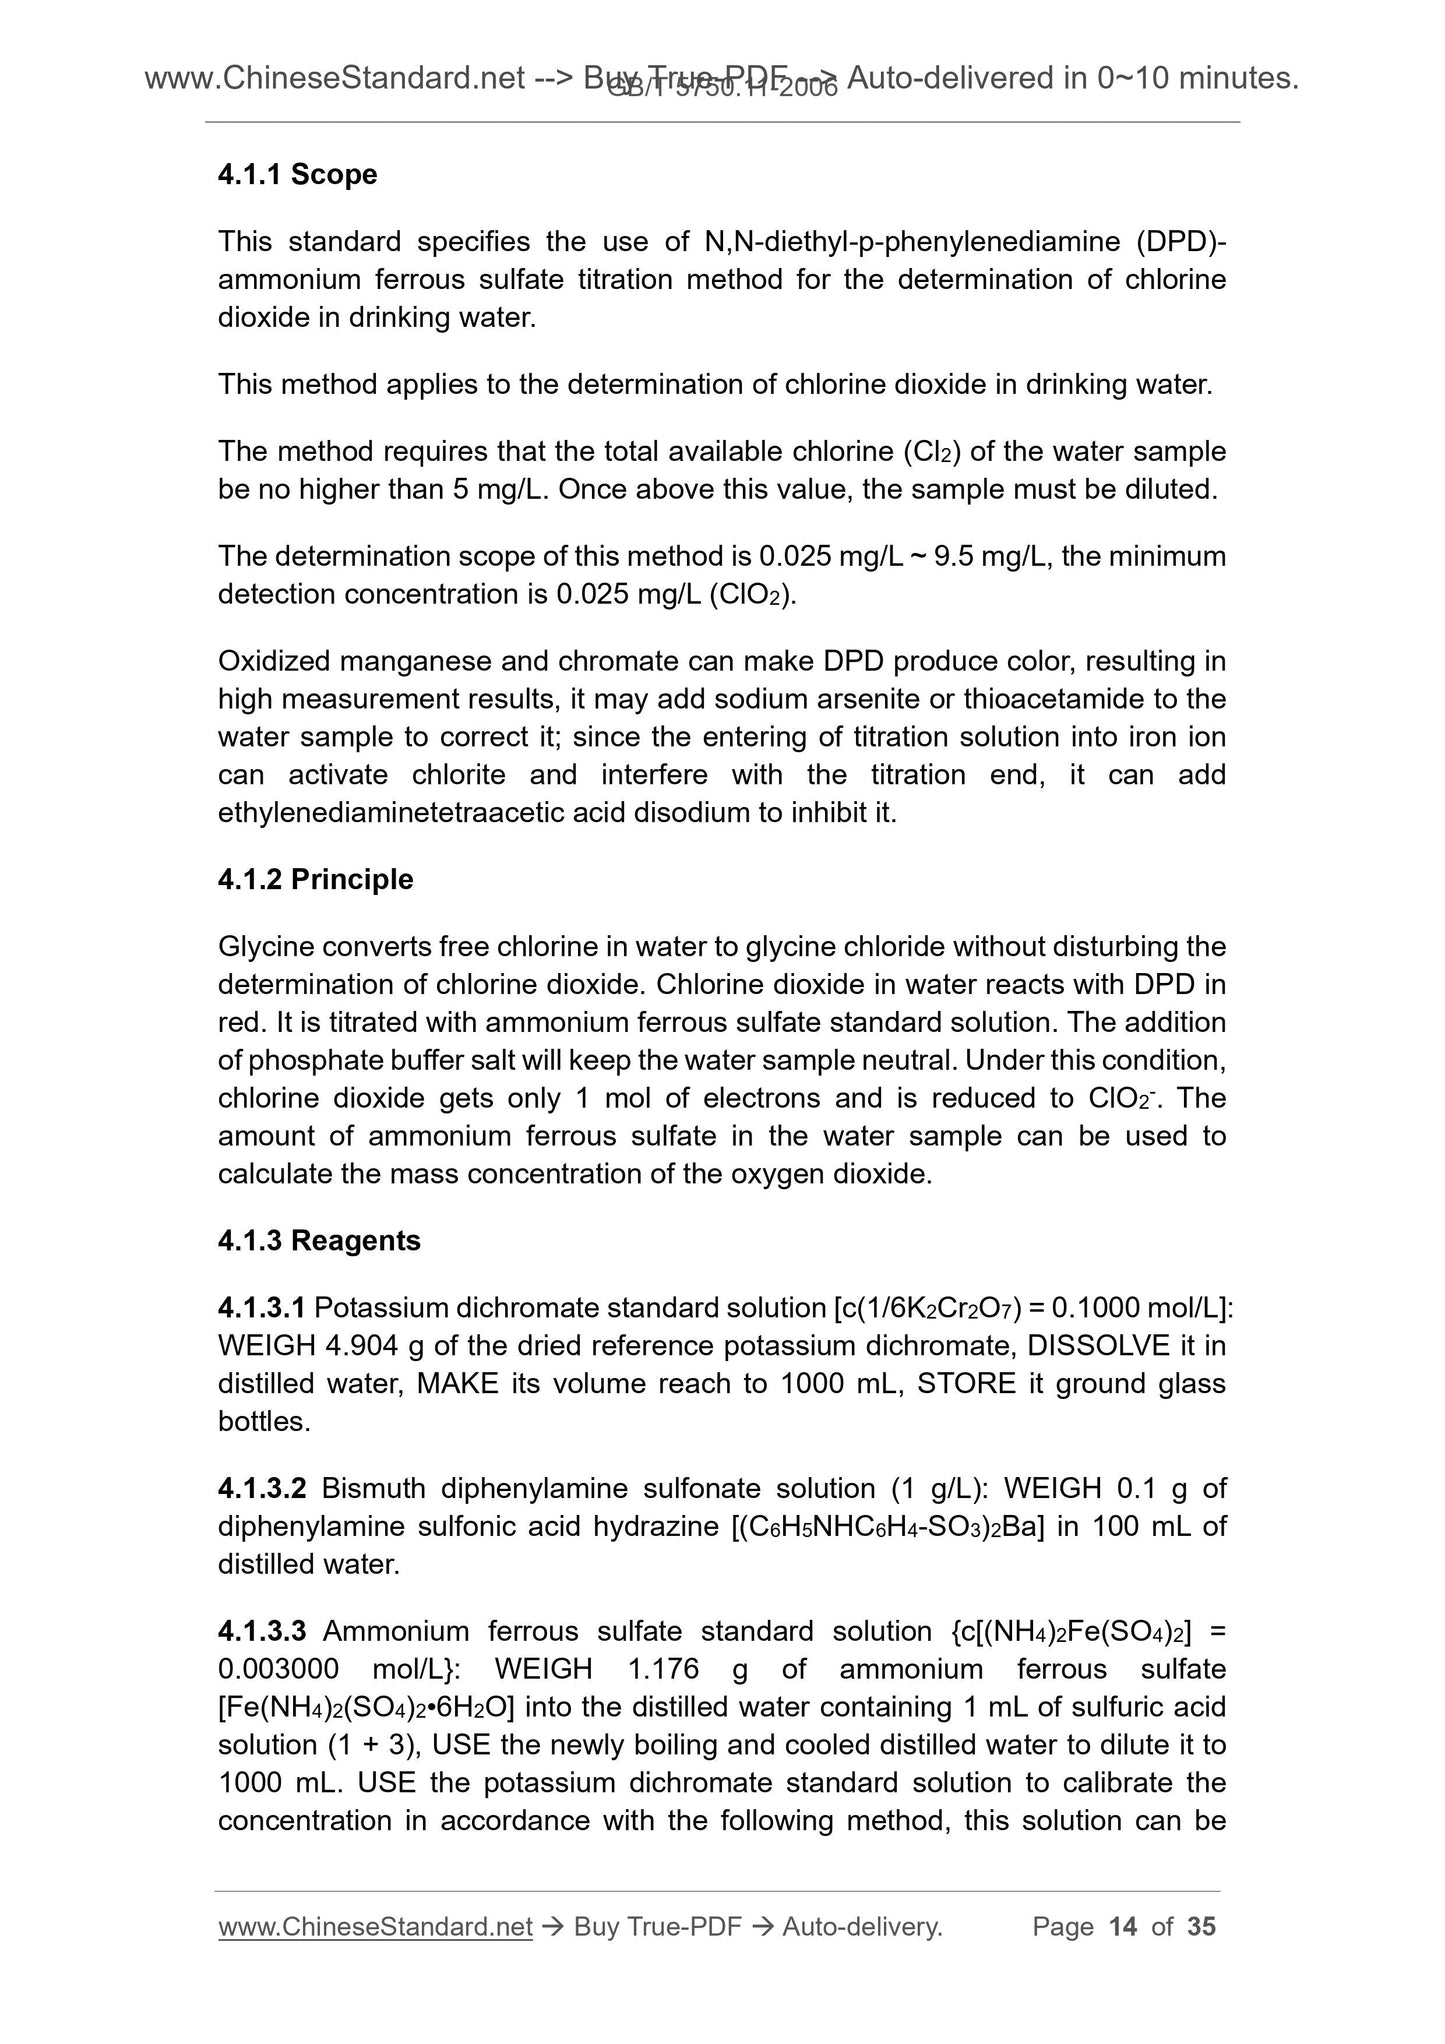 GB/T 5750.11-2006 Page 6